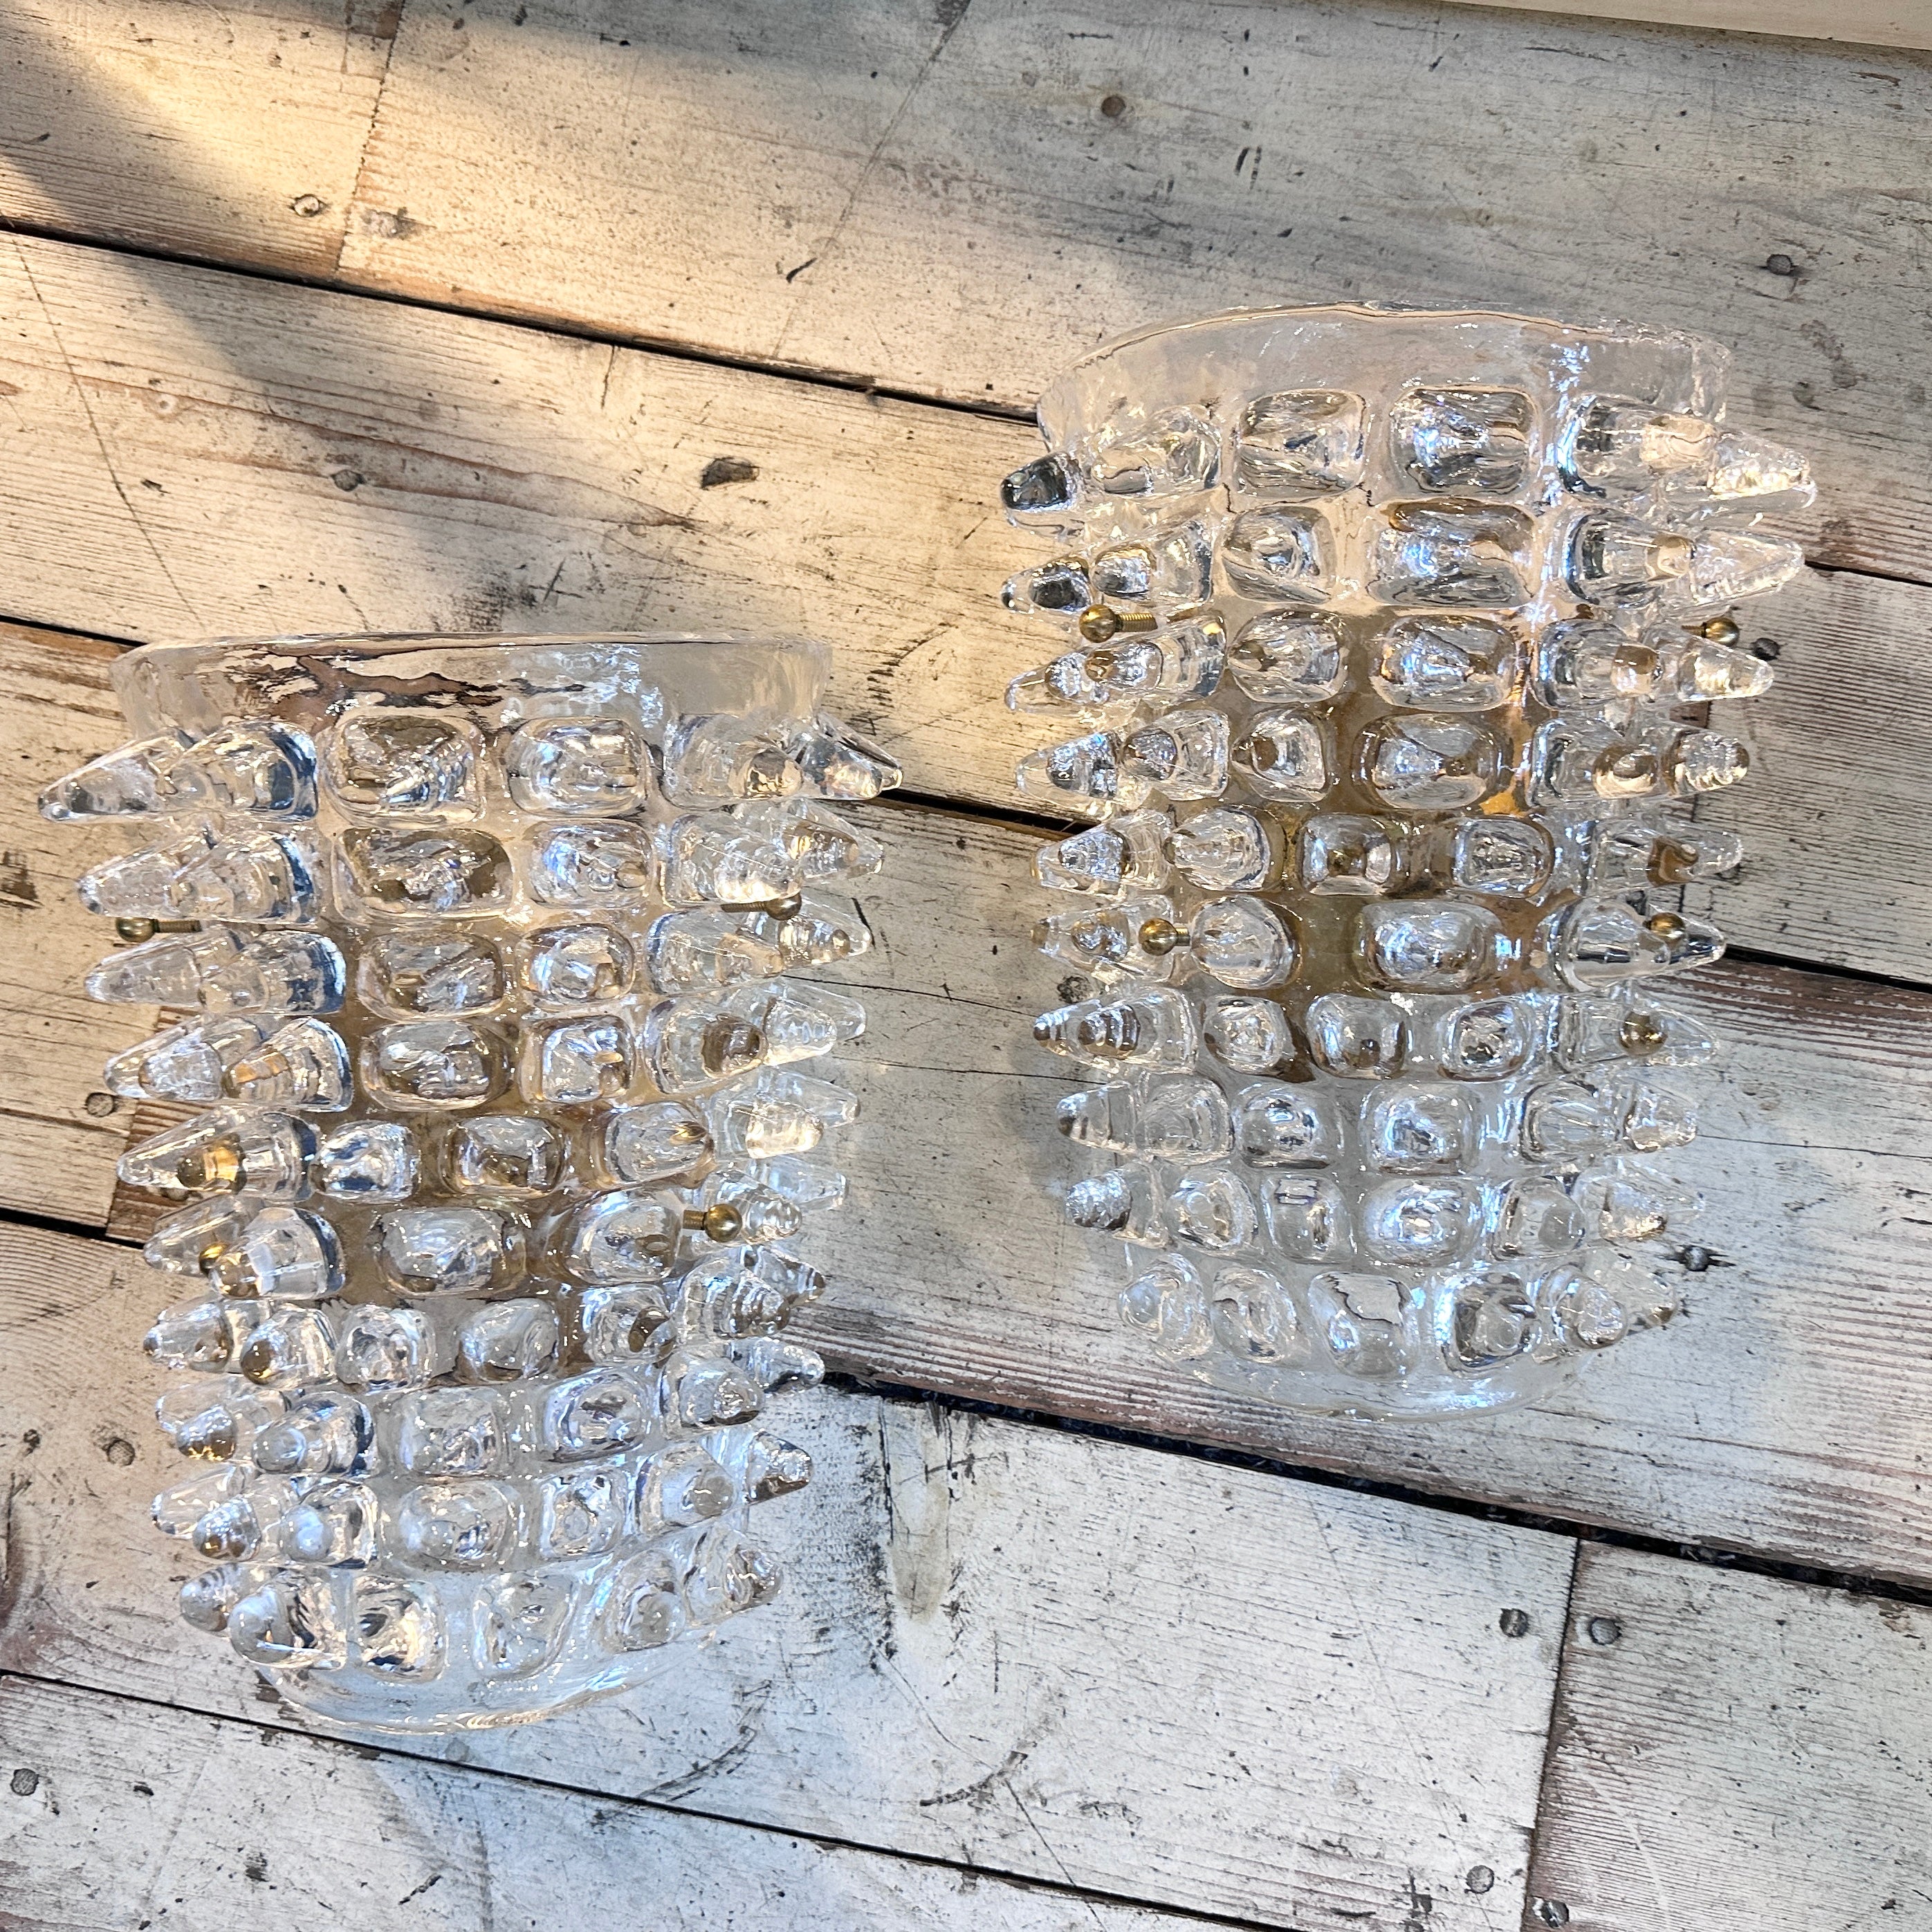 A pair of Mid-Century Modern rostrato transparent murano glass wall sconces hand-crafted in Italy in the style of famous manufacturer Barovier that invented this particular glass processing characterized by large light-reflecting points, obtained